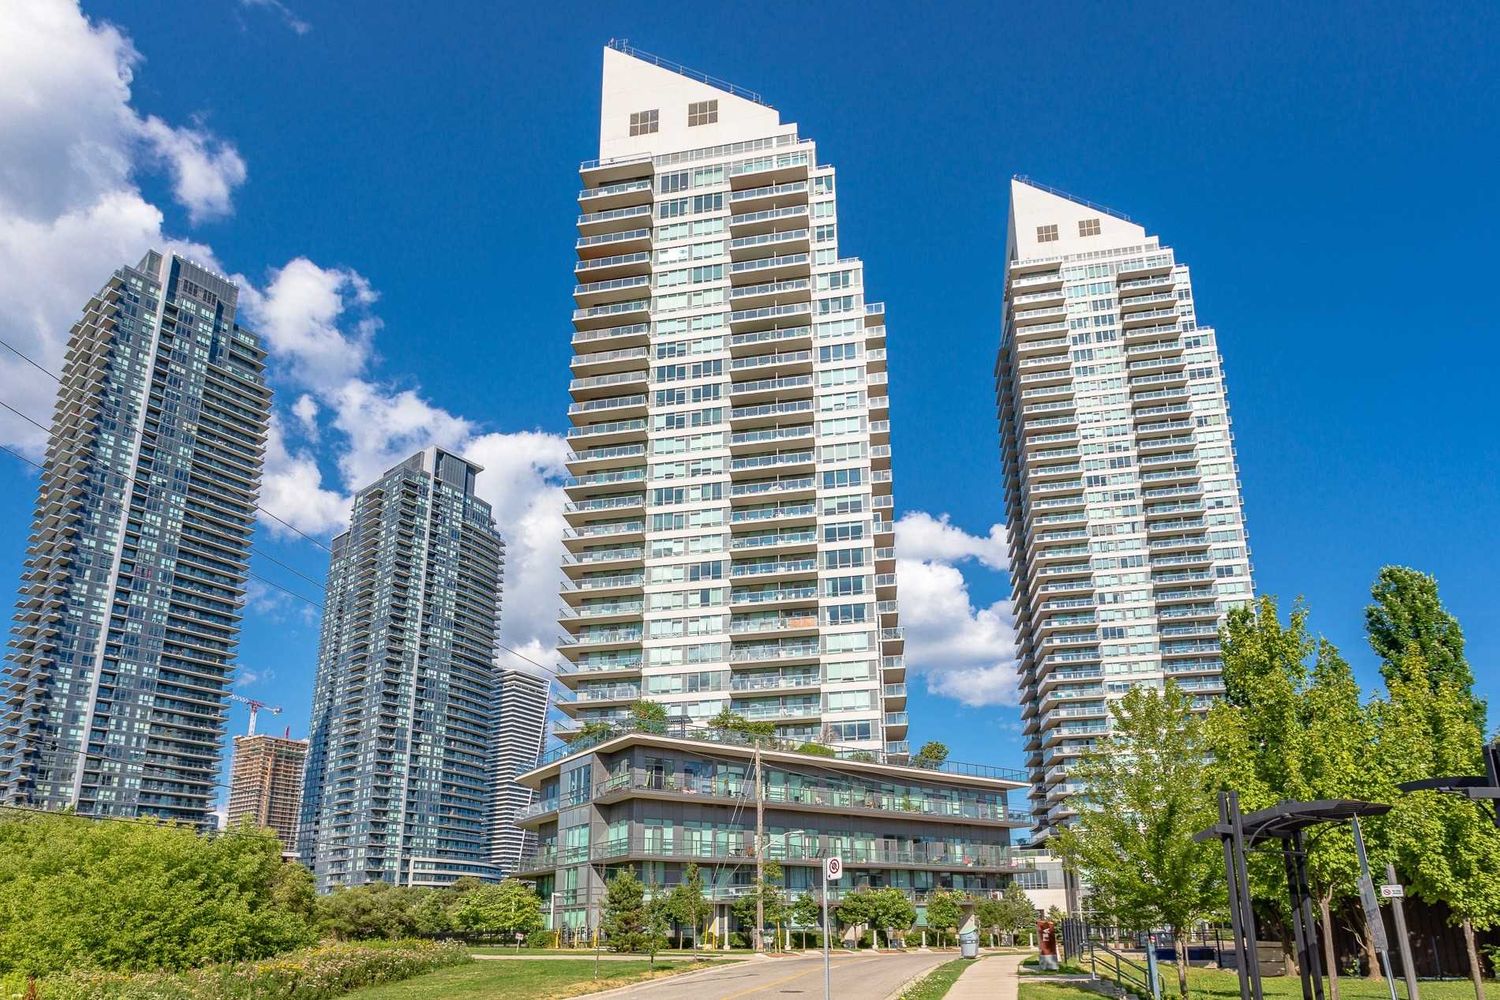 15 Legion Rd. This condo at Beyond The Sea - North Tower is located in  Etobicoke, Toronto - image #1 of 2 by Strata.ca